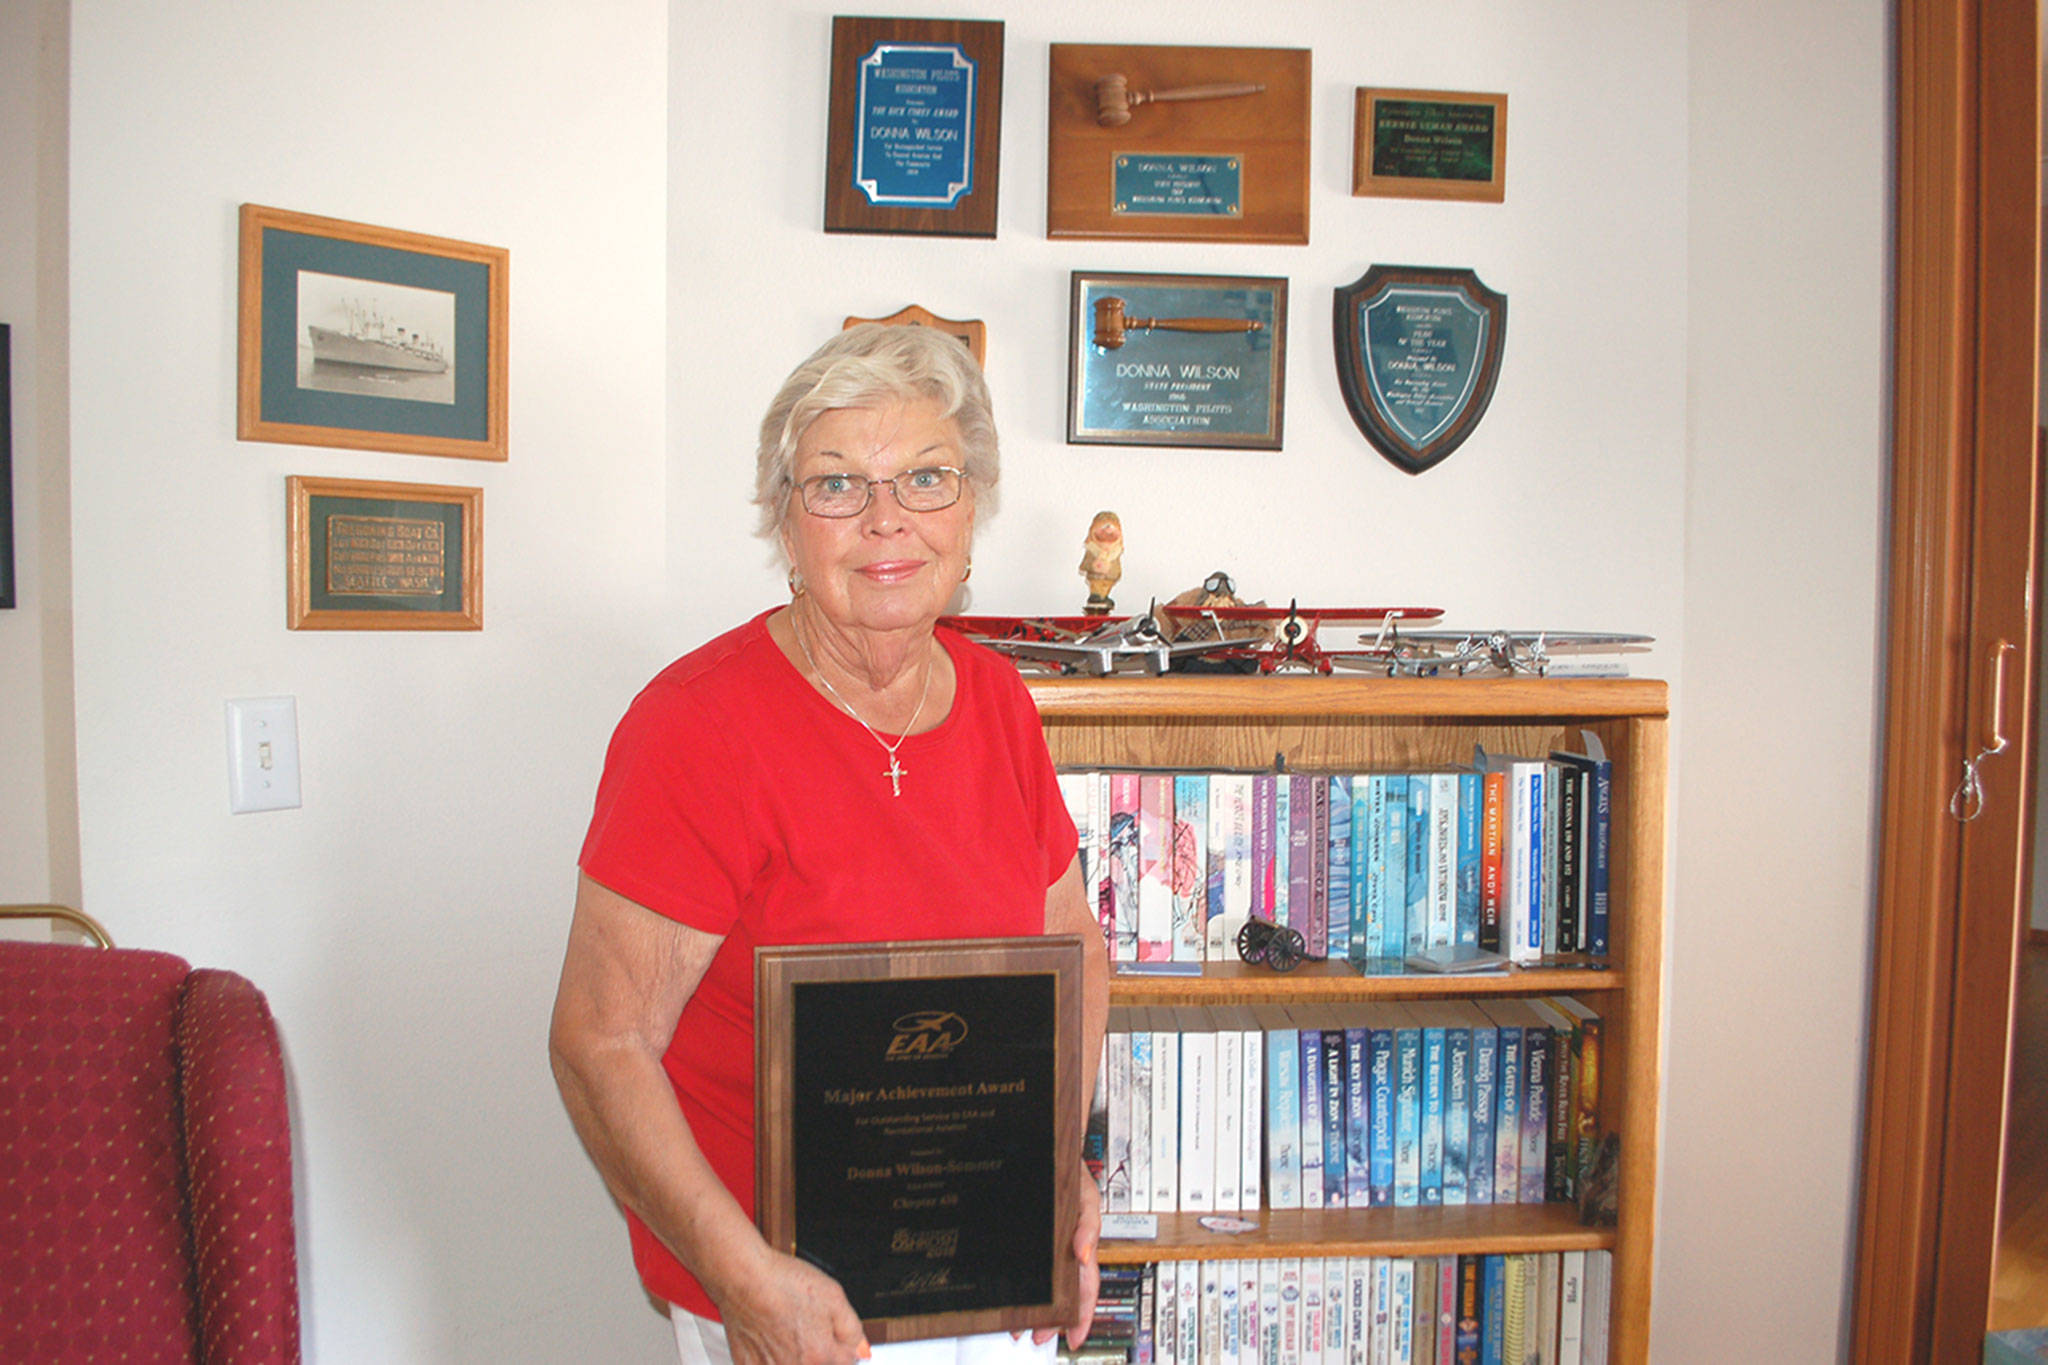 Among a handful of other aviation awards that hang on the walls of her home, Sequim’s Donna Wilson-Sommer is the Experimental Aircraft Association 2018 Major Achievement Award Winner for her many years of promoting aviation in her local communities. (Erin Hawkins/Olympic Peninsula News Group)